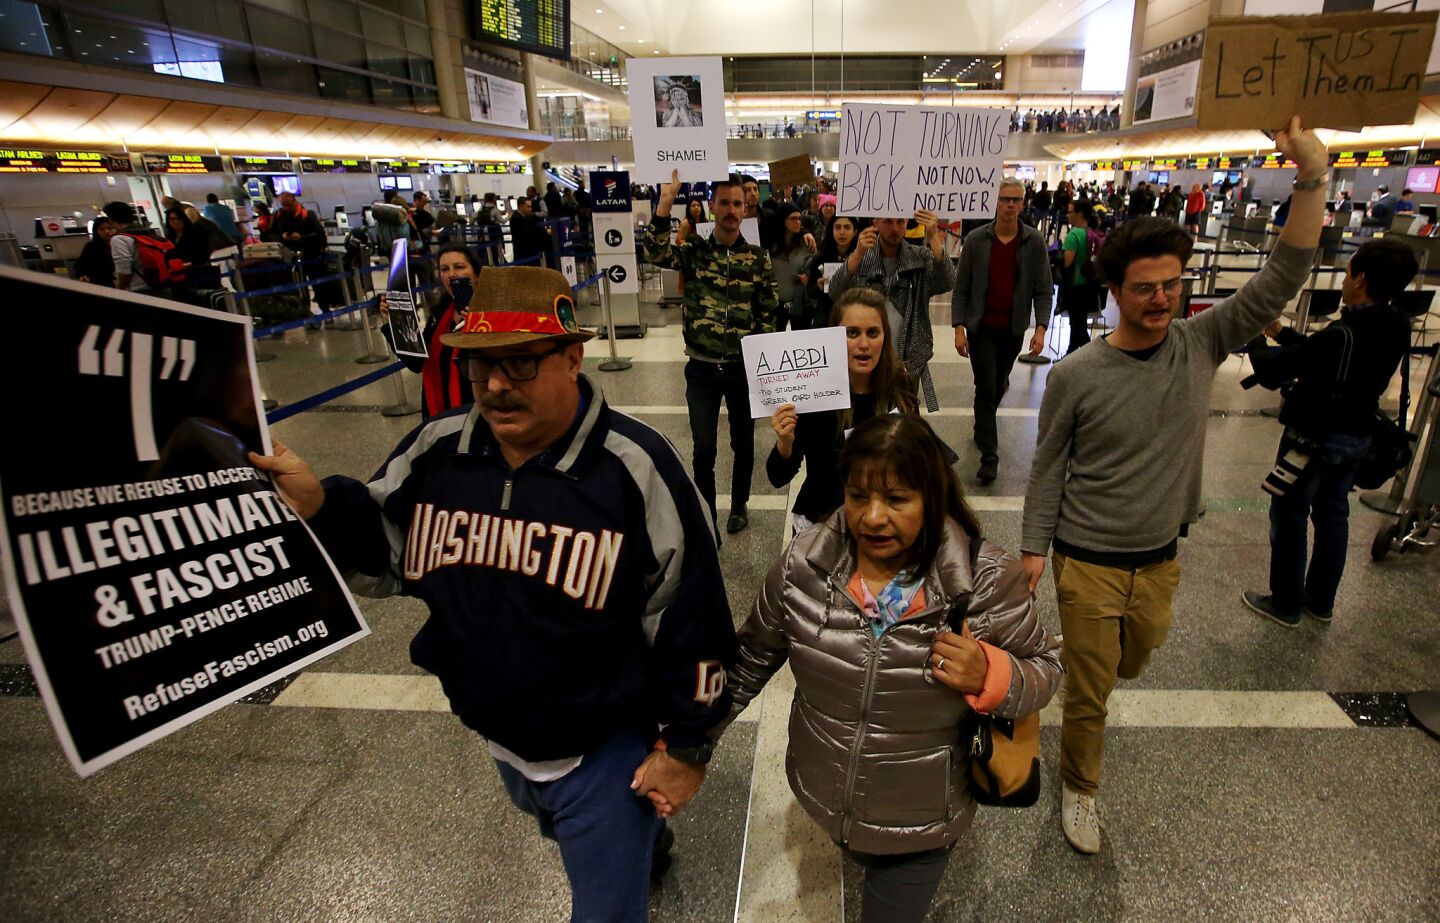 Protesters march through Tom Bradley International Terminal to voice opposition to President Trump's refugee policy.